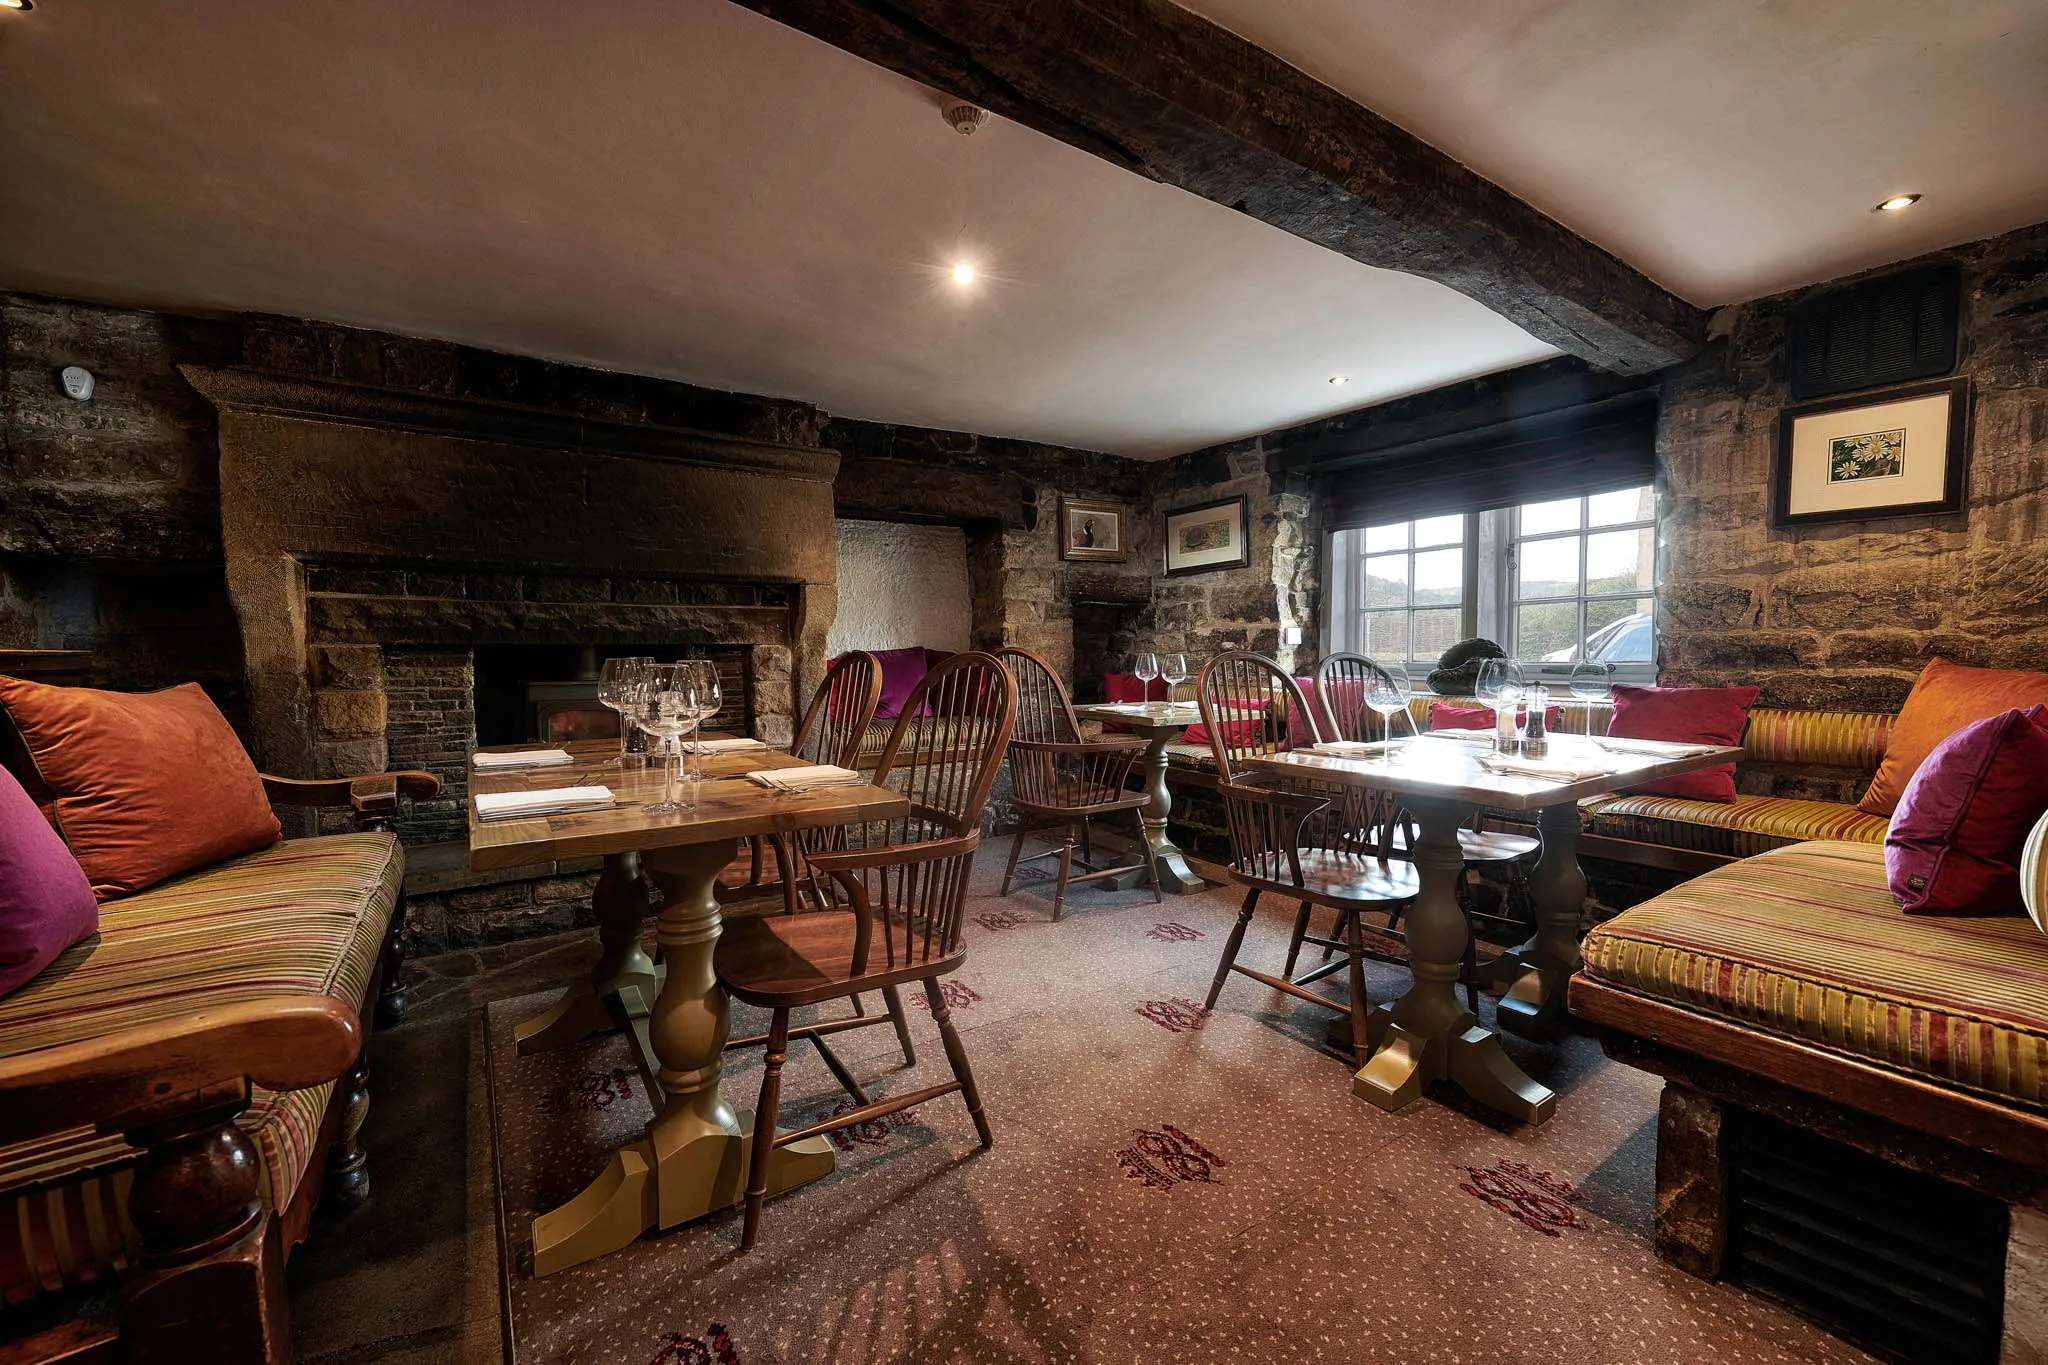 Country Pubs, Classic Food & Rustic Settings